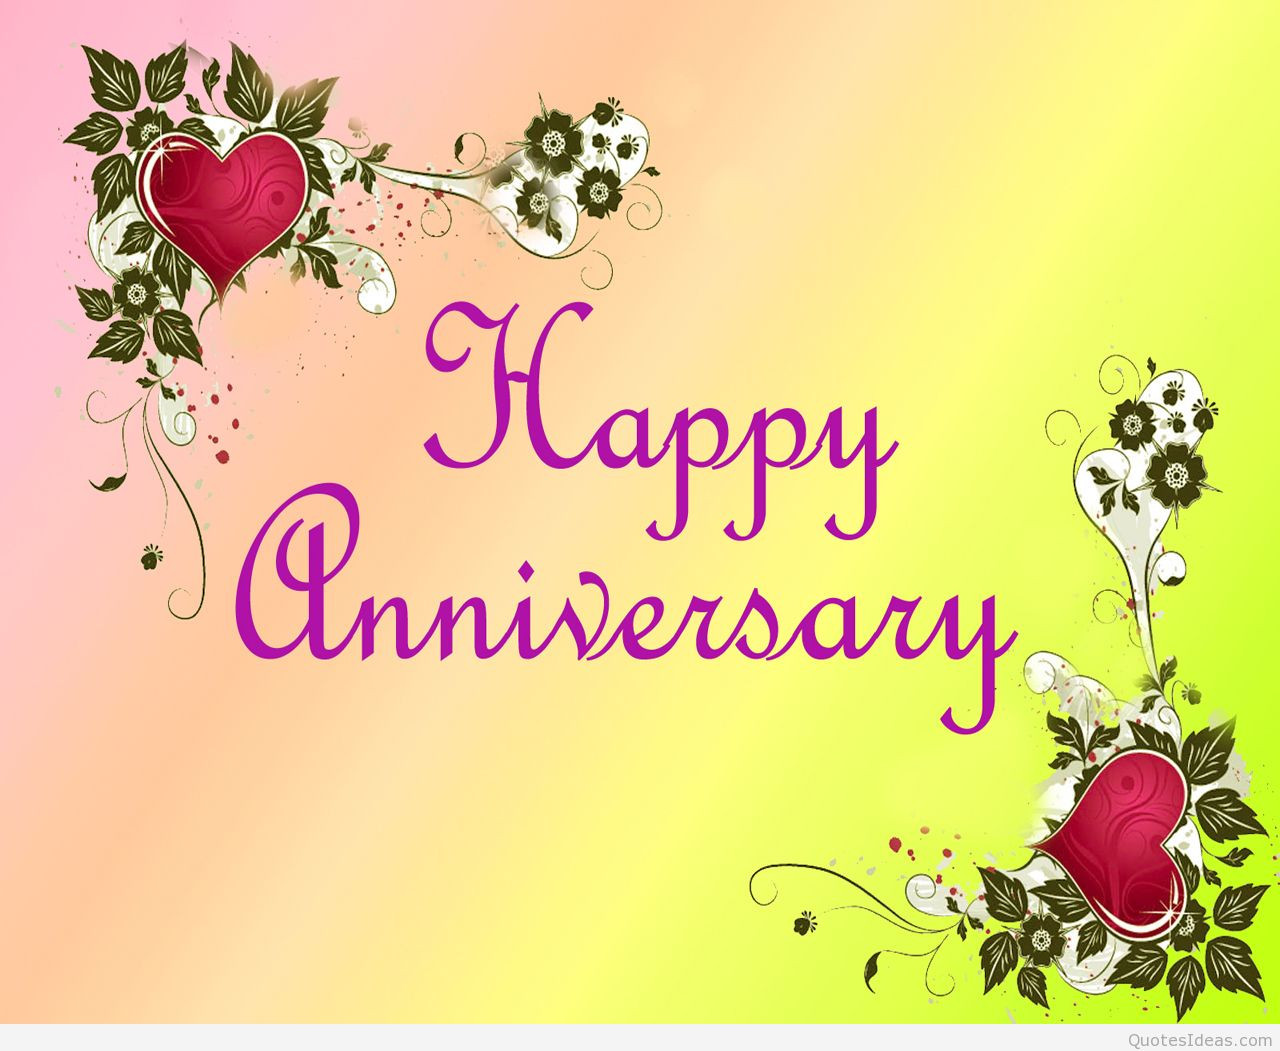 Happy Marriage Anniversary Quotes
 Happy Anniversary Quotes For QuotesGram